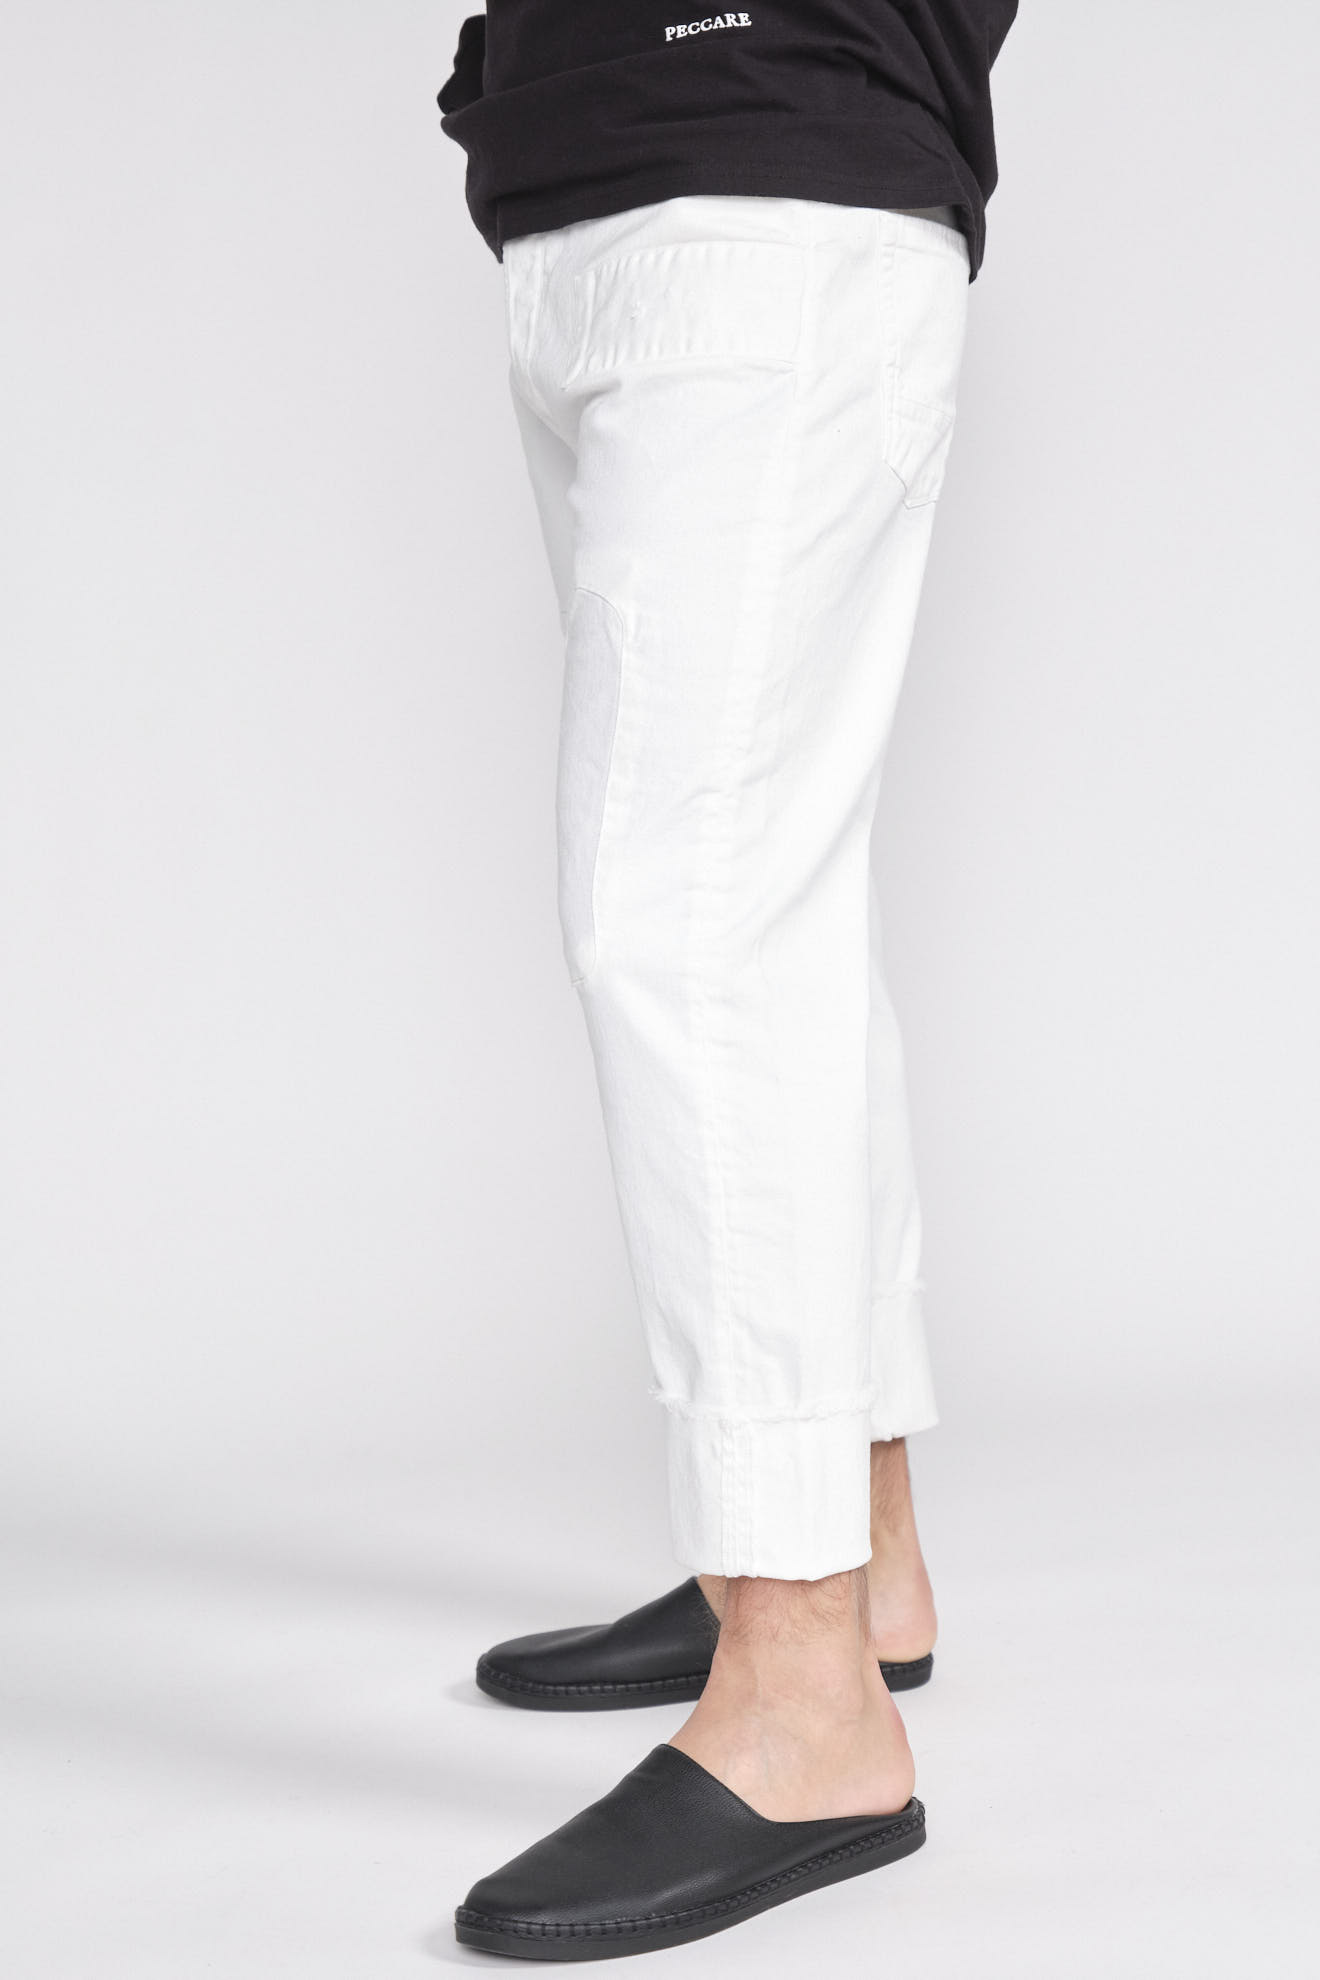 maurizio massimino Jose - denim jeans with patch patches white 46